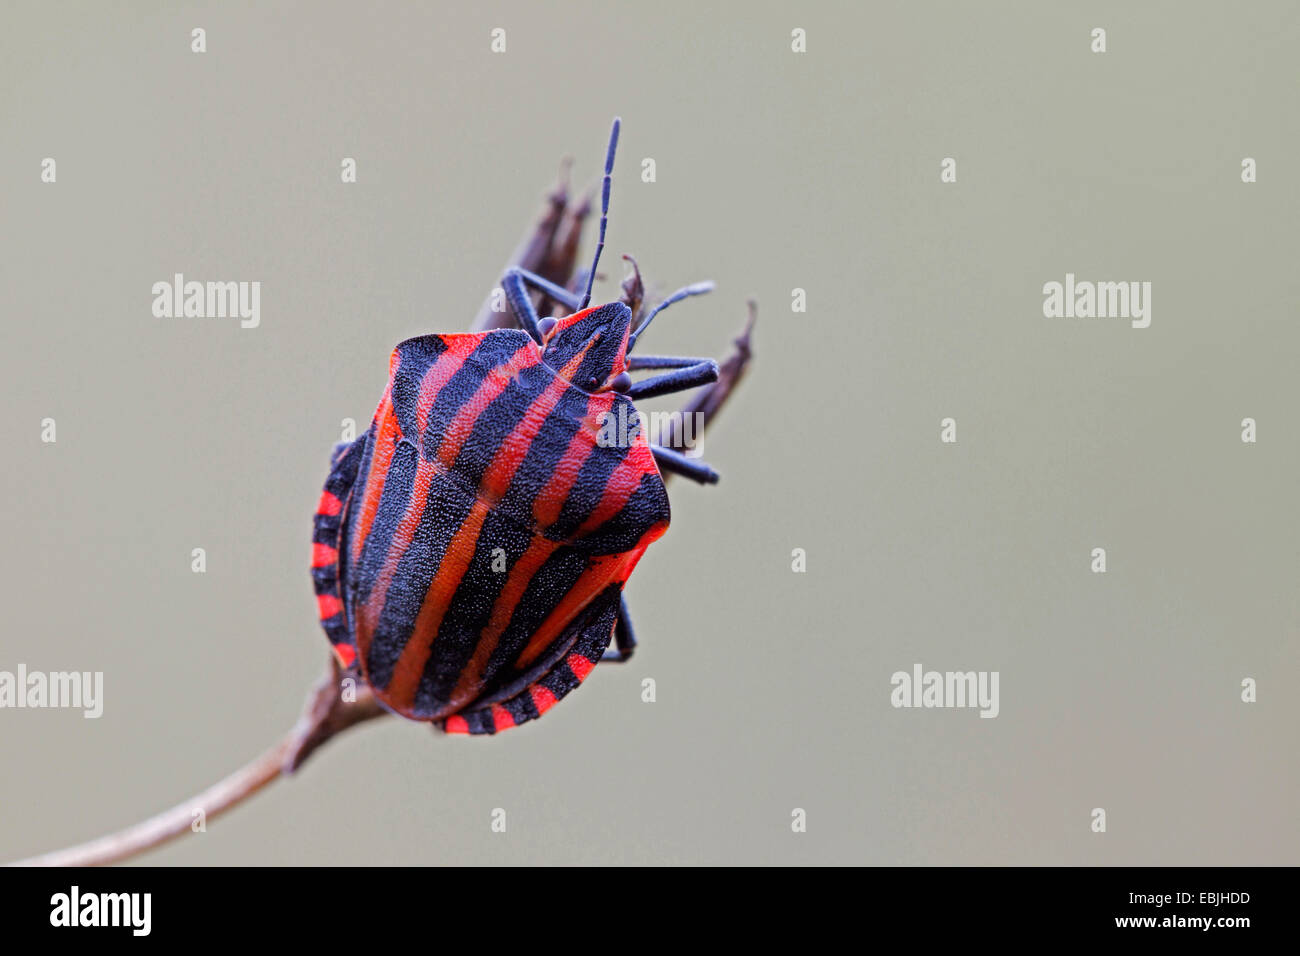 Graphosoma lineatum, Italian Striped-Bug, Minstrel Bug (Graphosoma lineatum, Graphosoma italicum), sitting on a sprout, Germany, Schleswig-Holstein Stock Photo